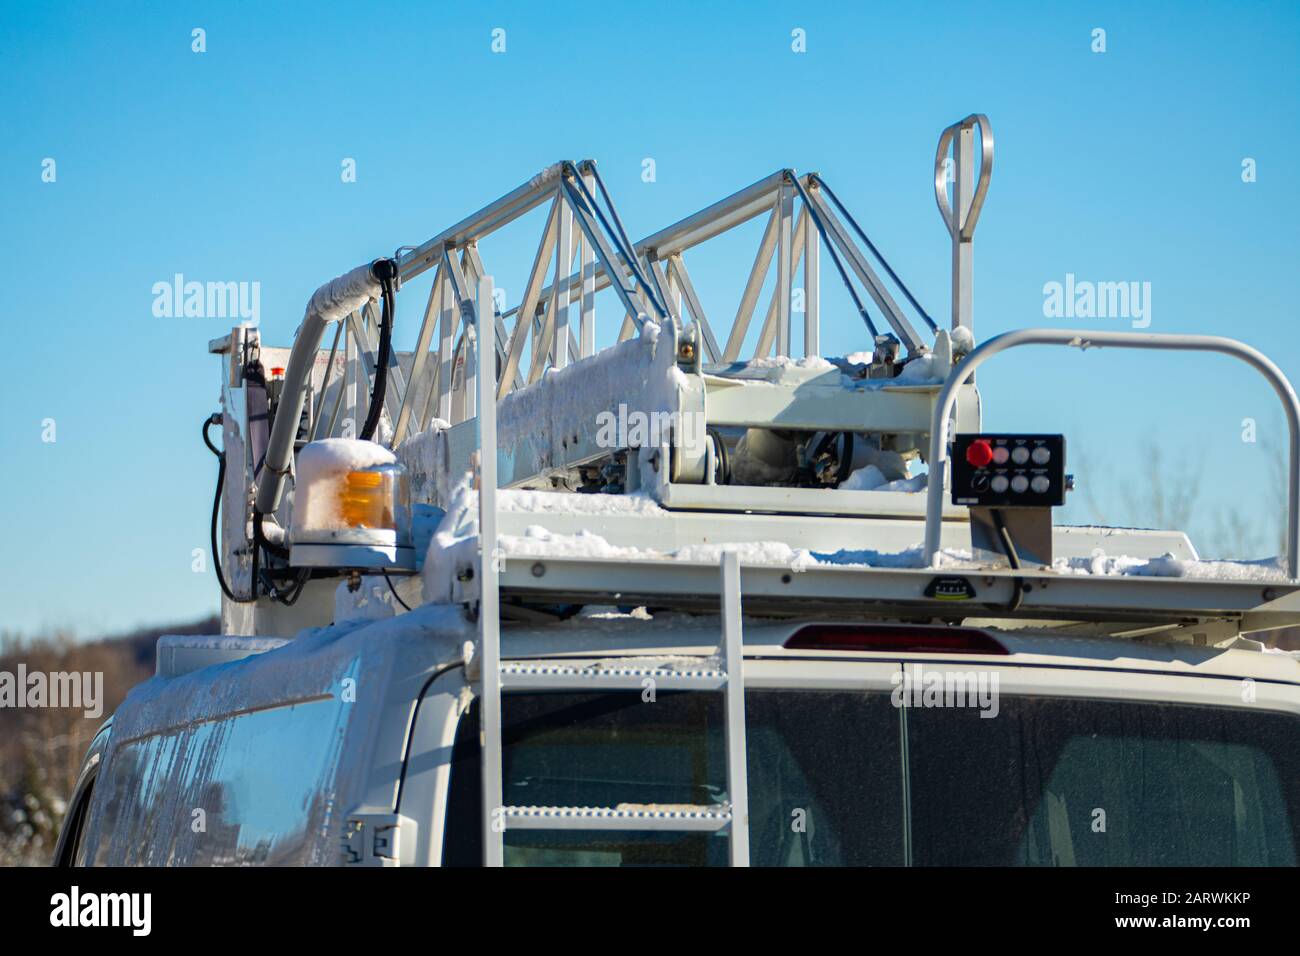 A close up and detailed view of the operating equipment atop a mobile works van, amber light and scissor lift on bucket truck. Under a blue winter sky Stock Photo